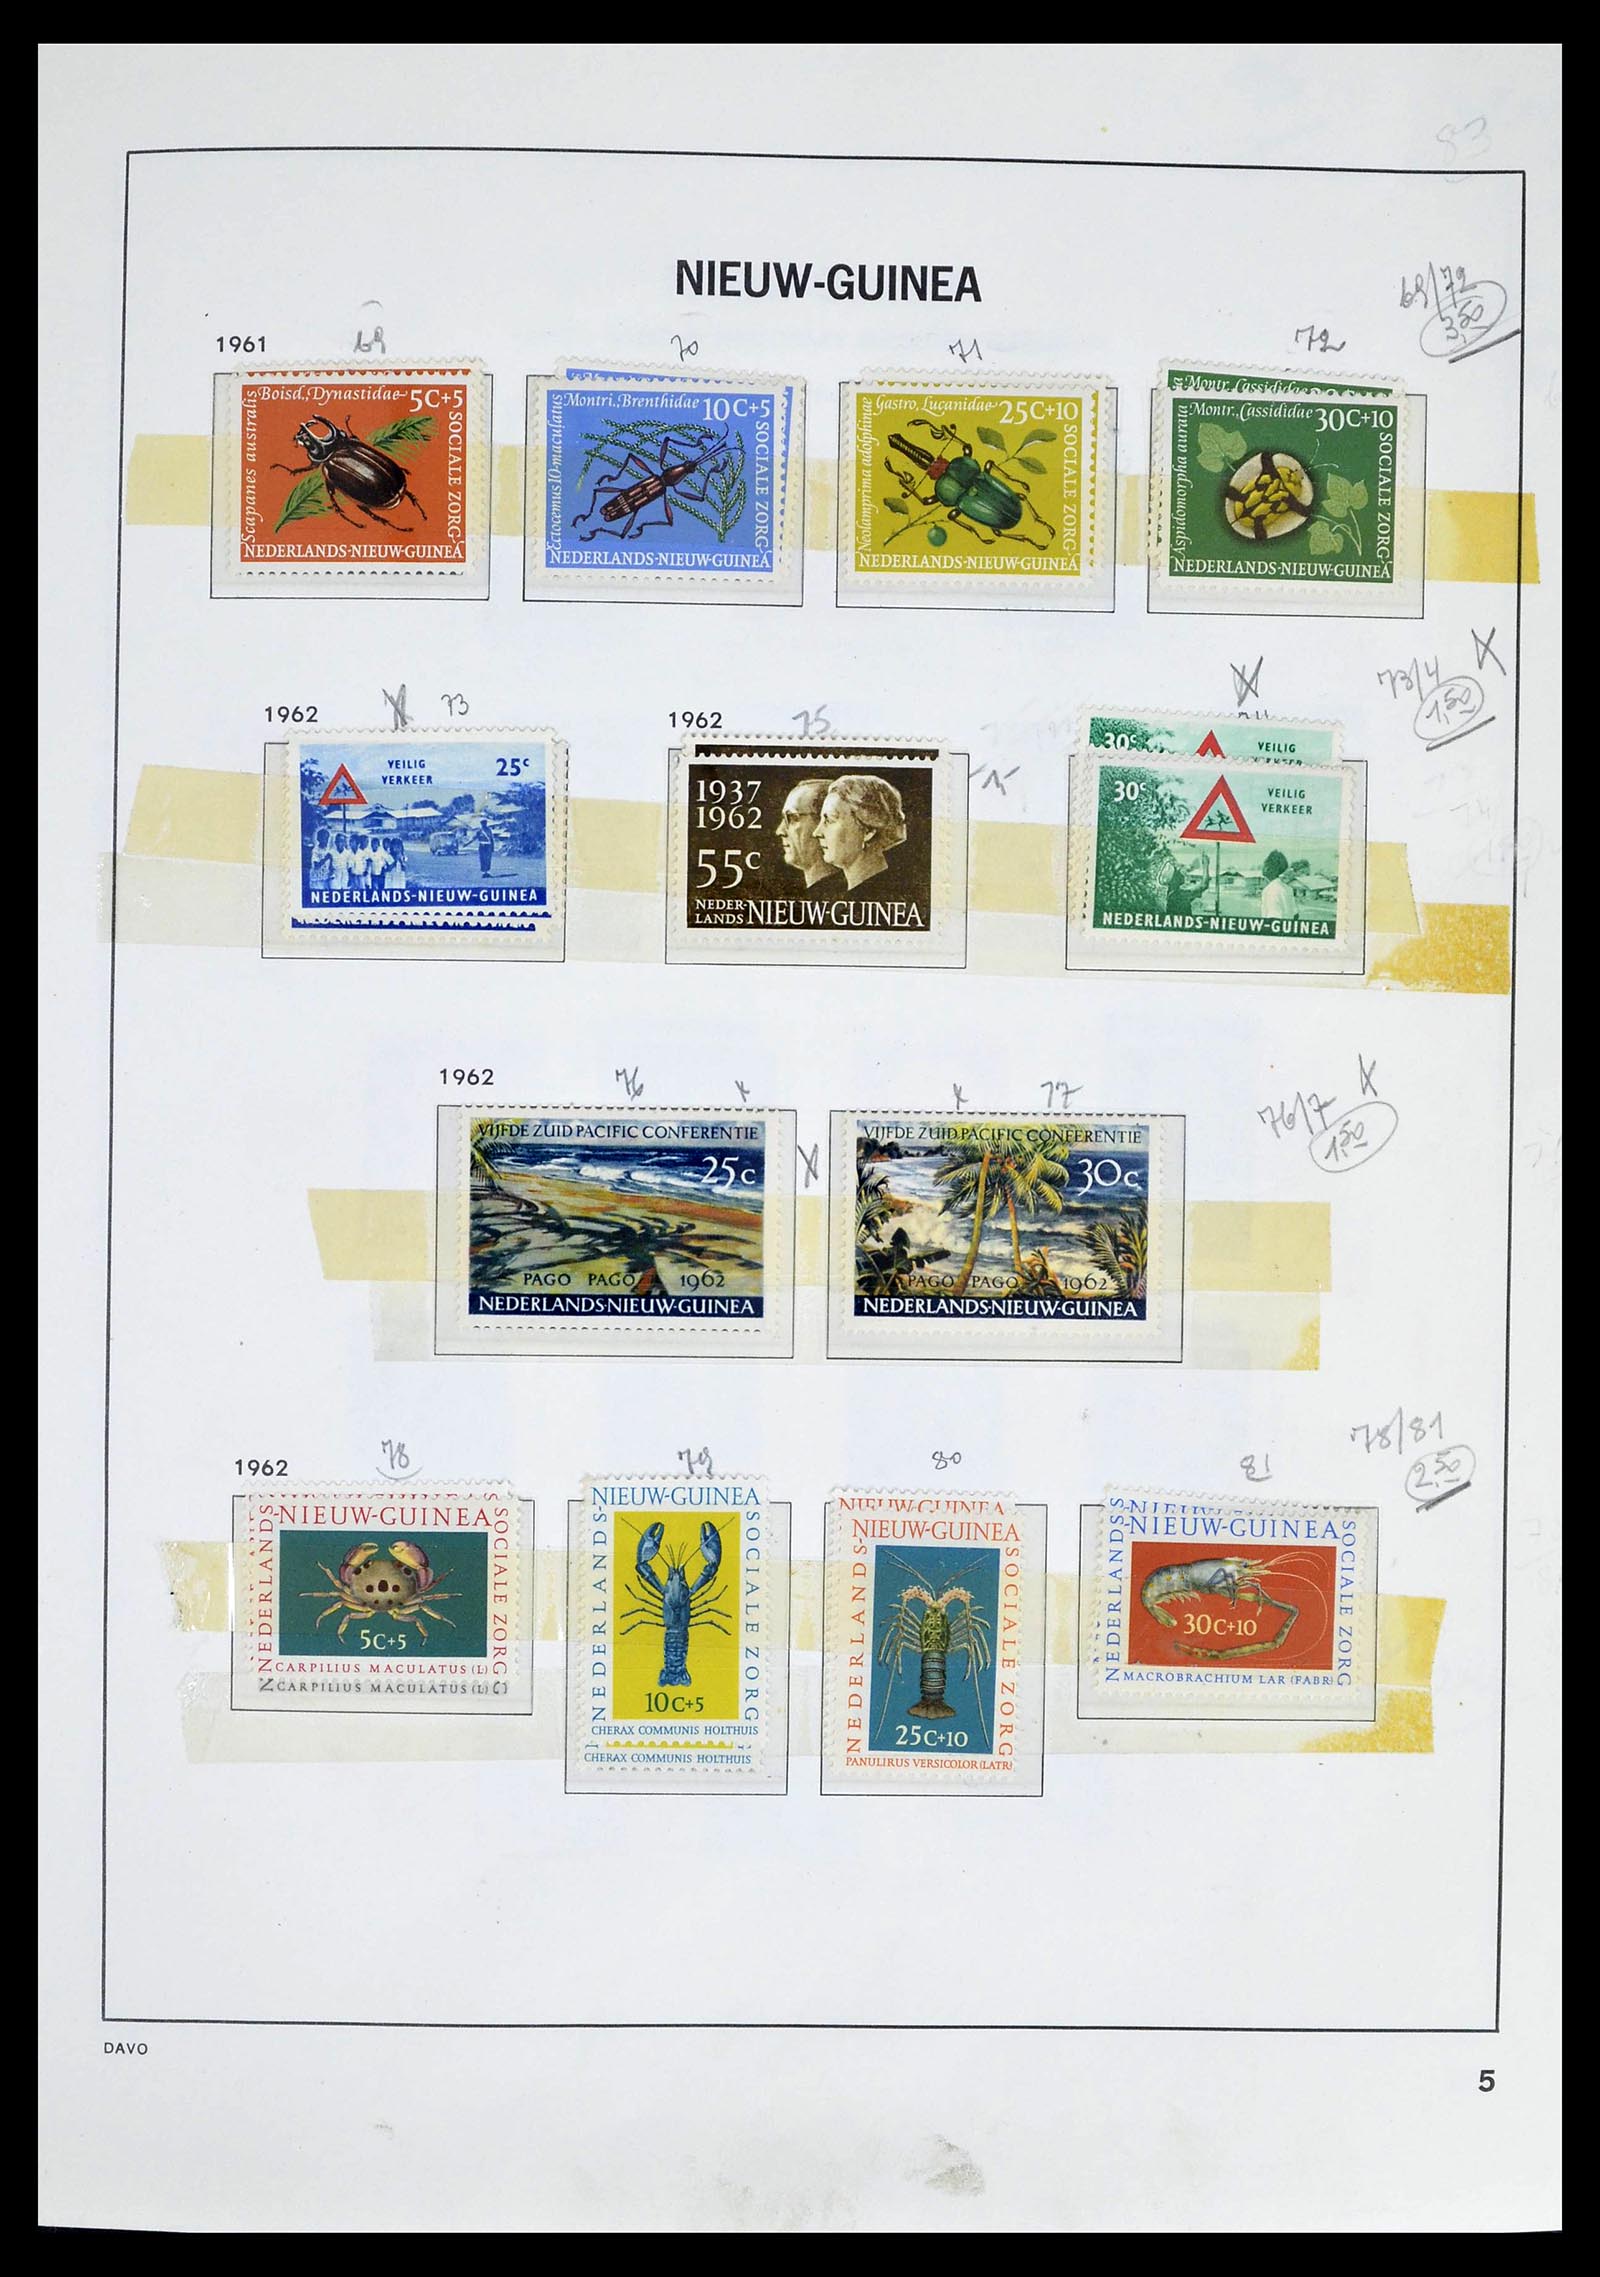 39263 0039 - Stamp collection 39263 Dutch territories 1864-1970.